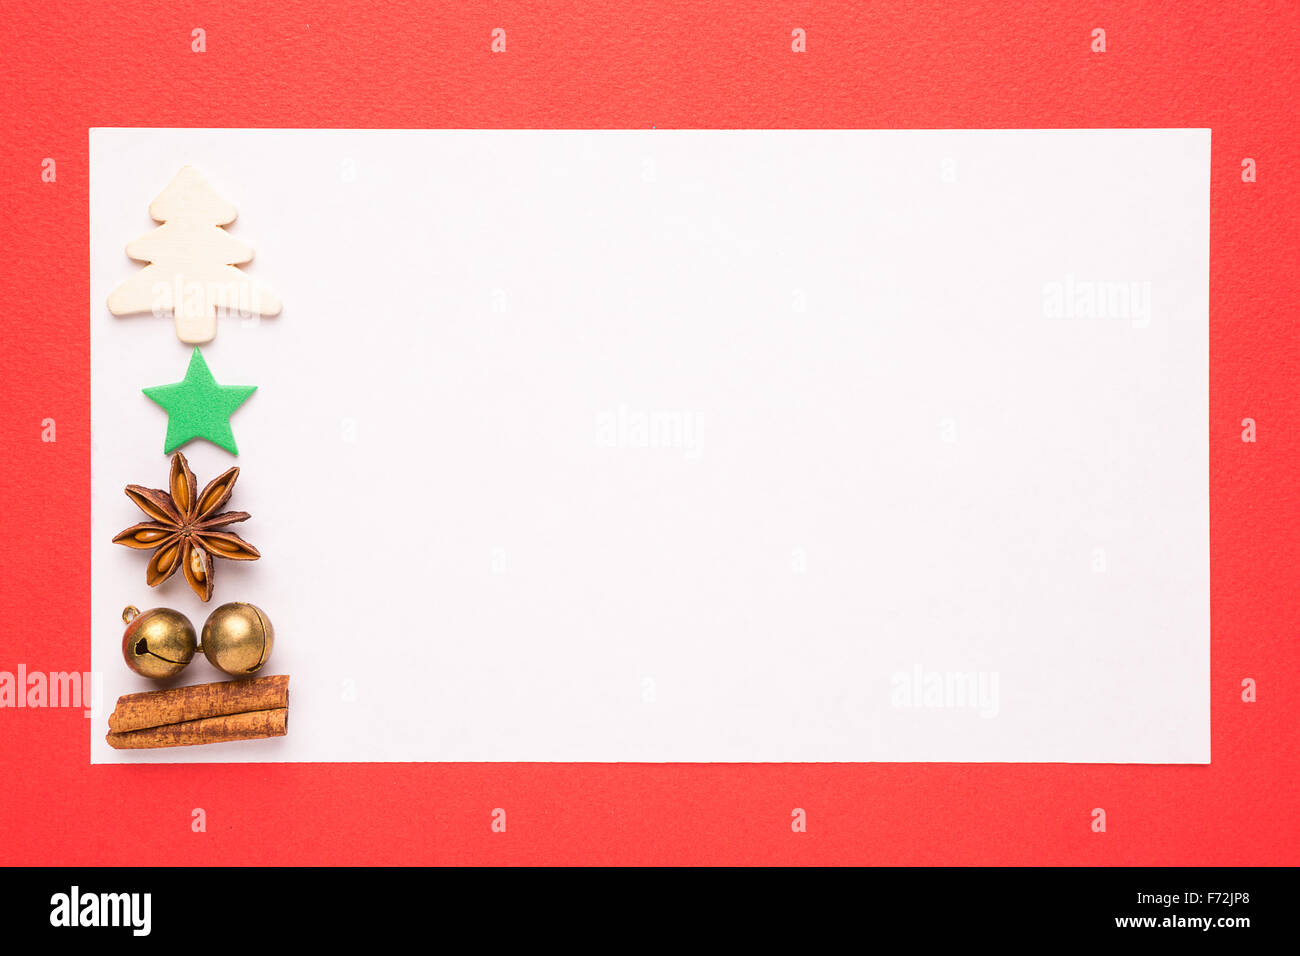 Blank Christmas card or invitation on red background Stock Photo